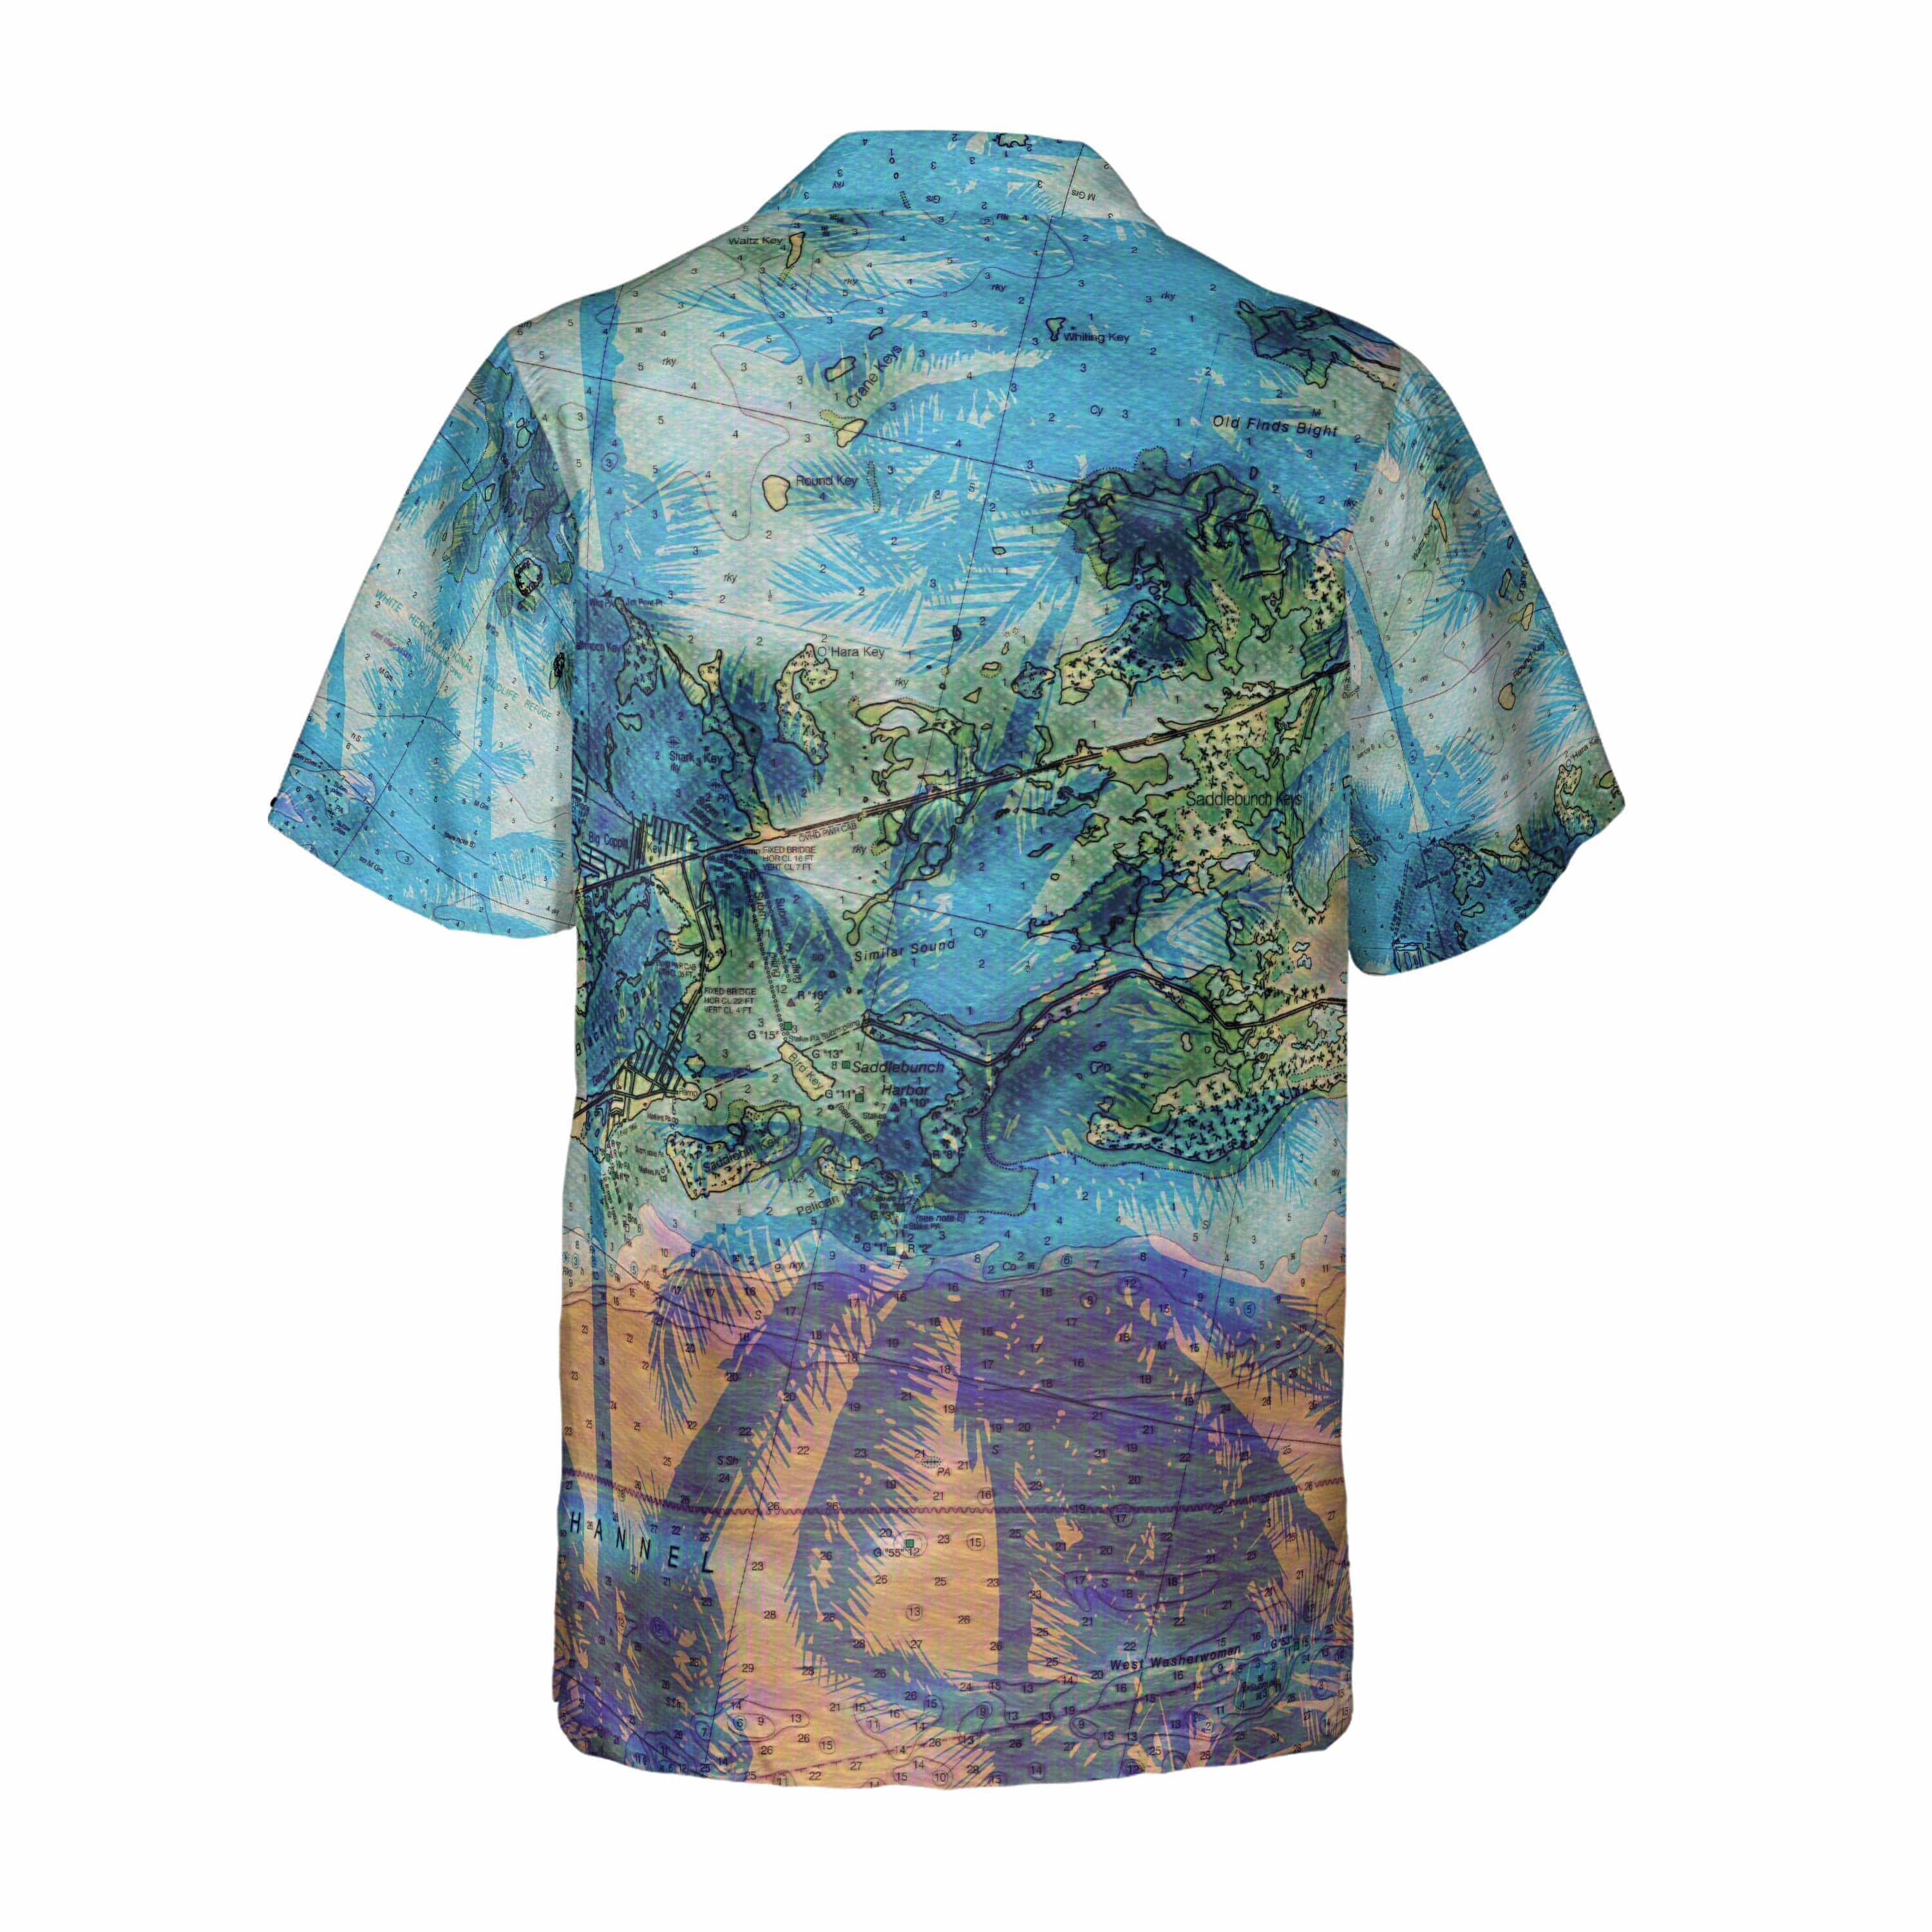 The Key West Beach Painting Camp Shirt